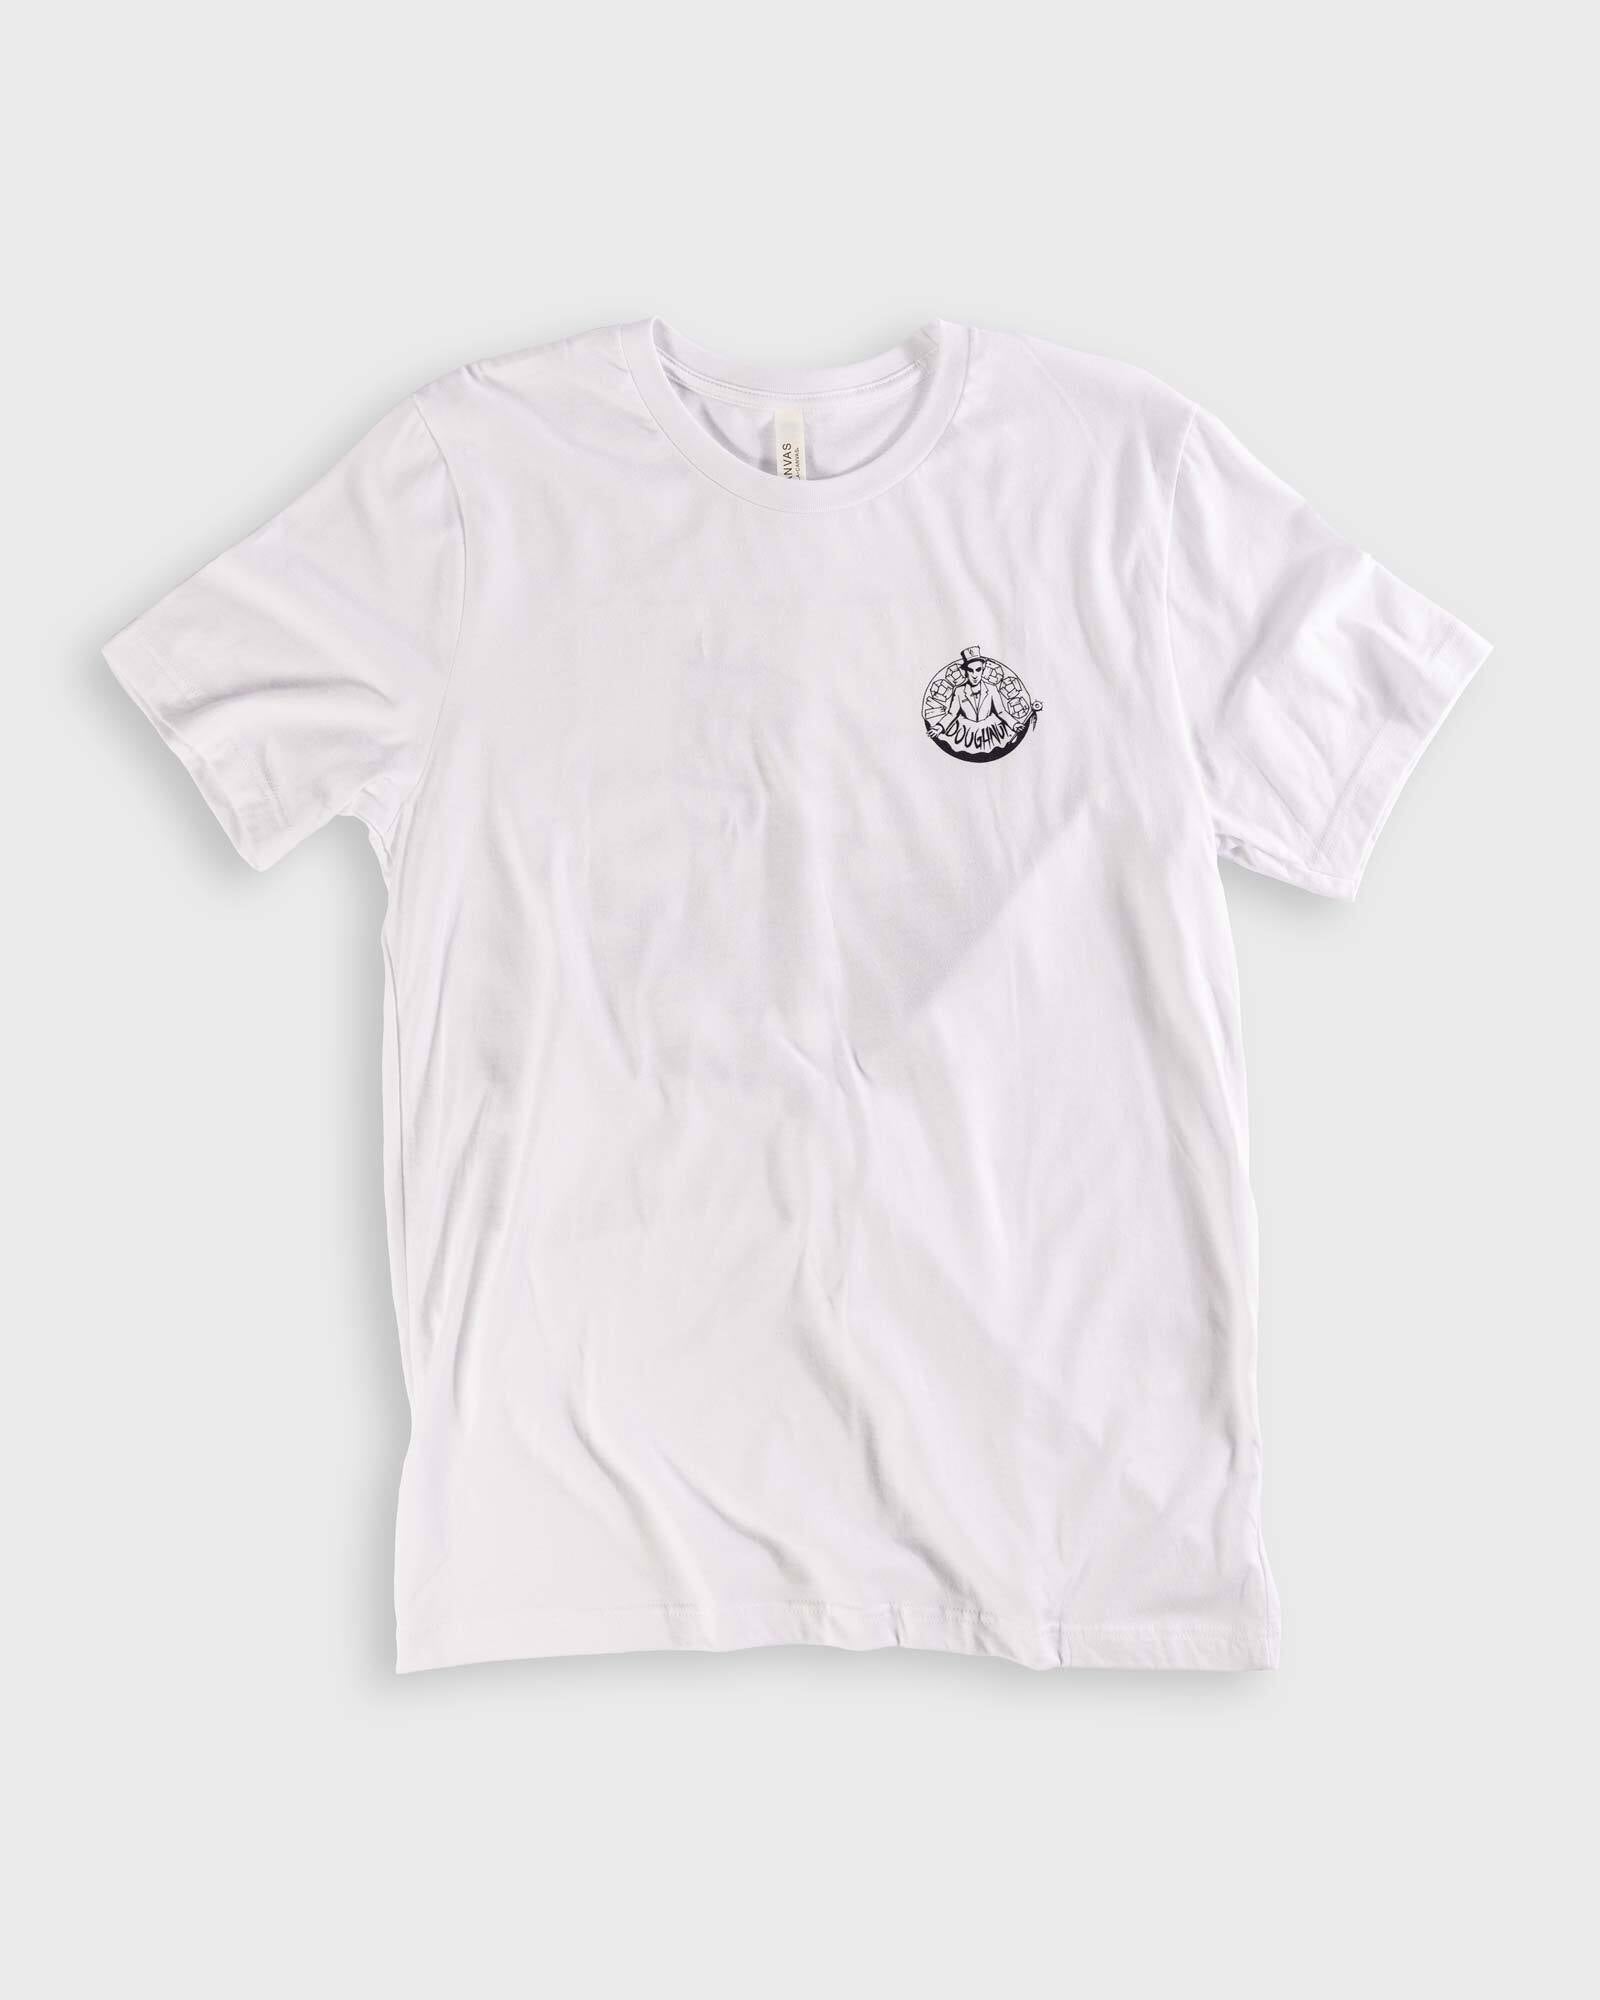 white t-shirt with white voodoo baron logo on front left chest